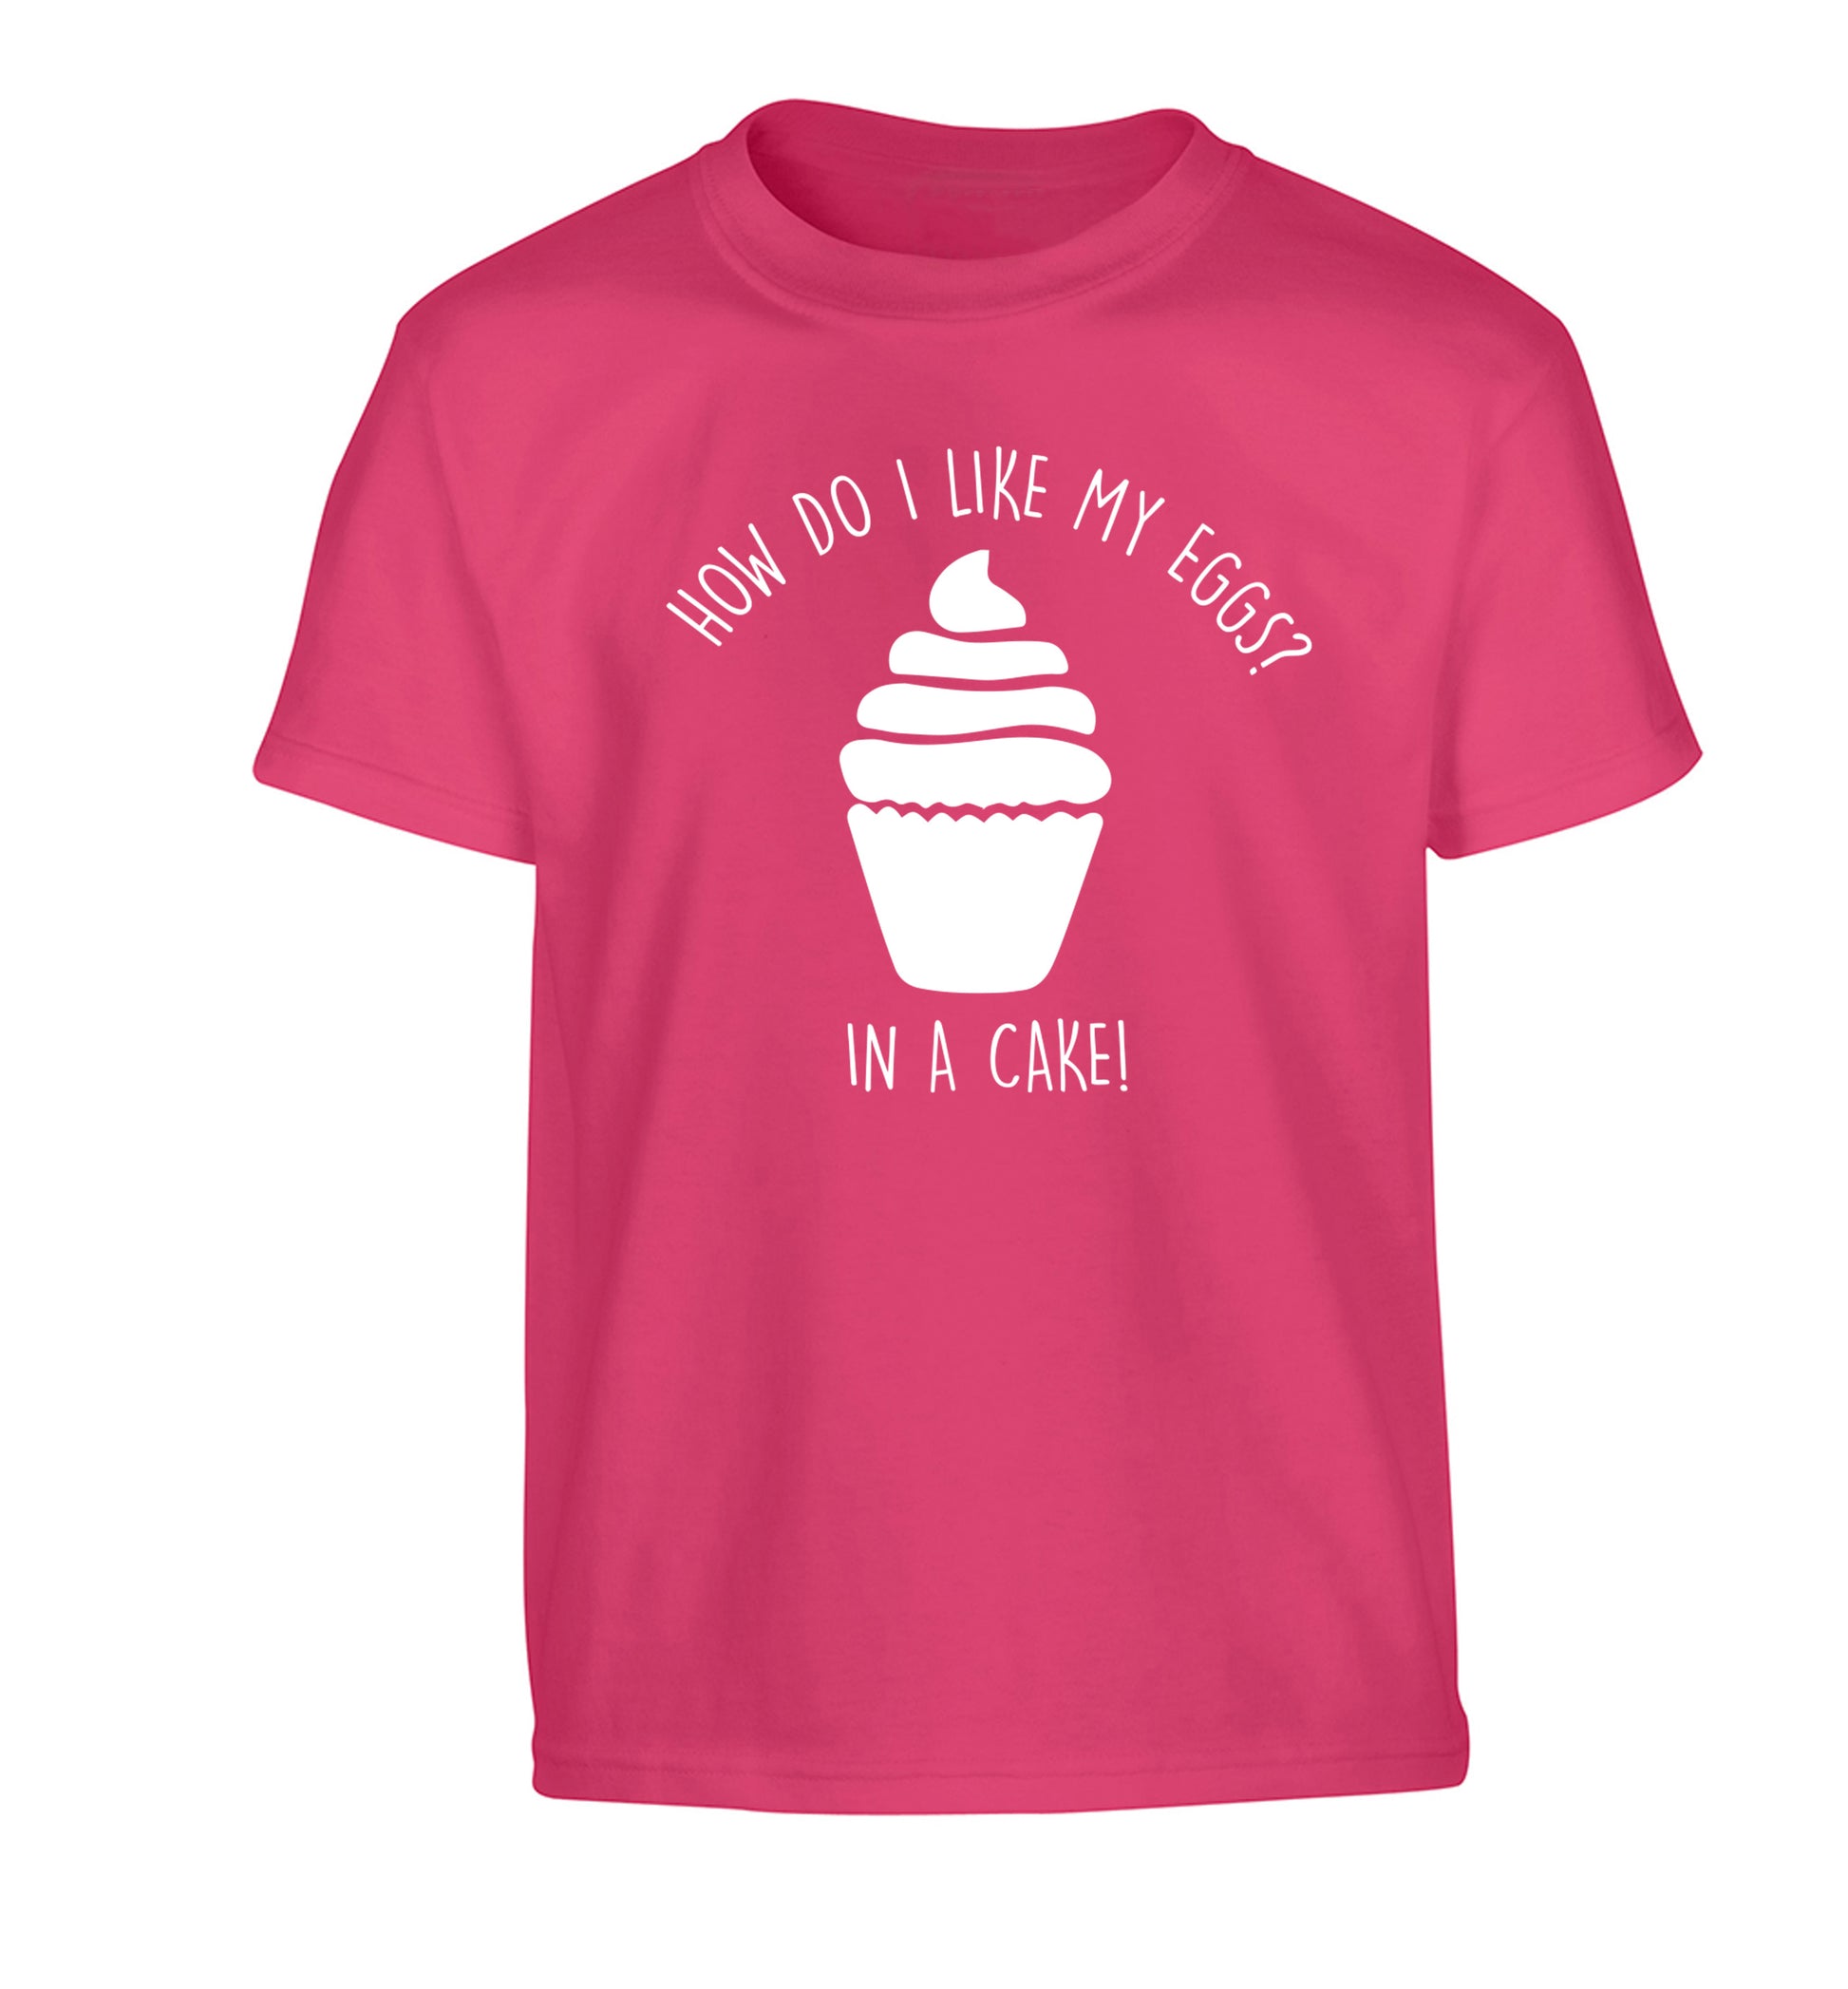 How do I like my eggs? In a cake! Children's pink Tshirt 12-14 Years